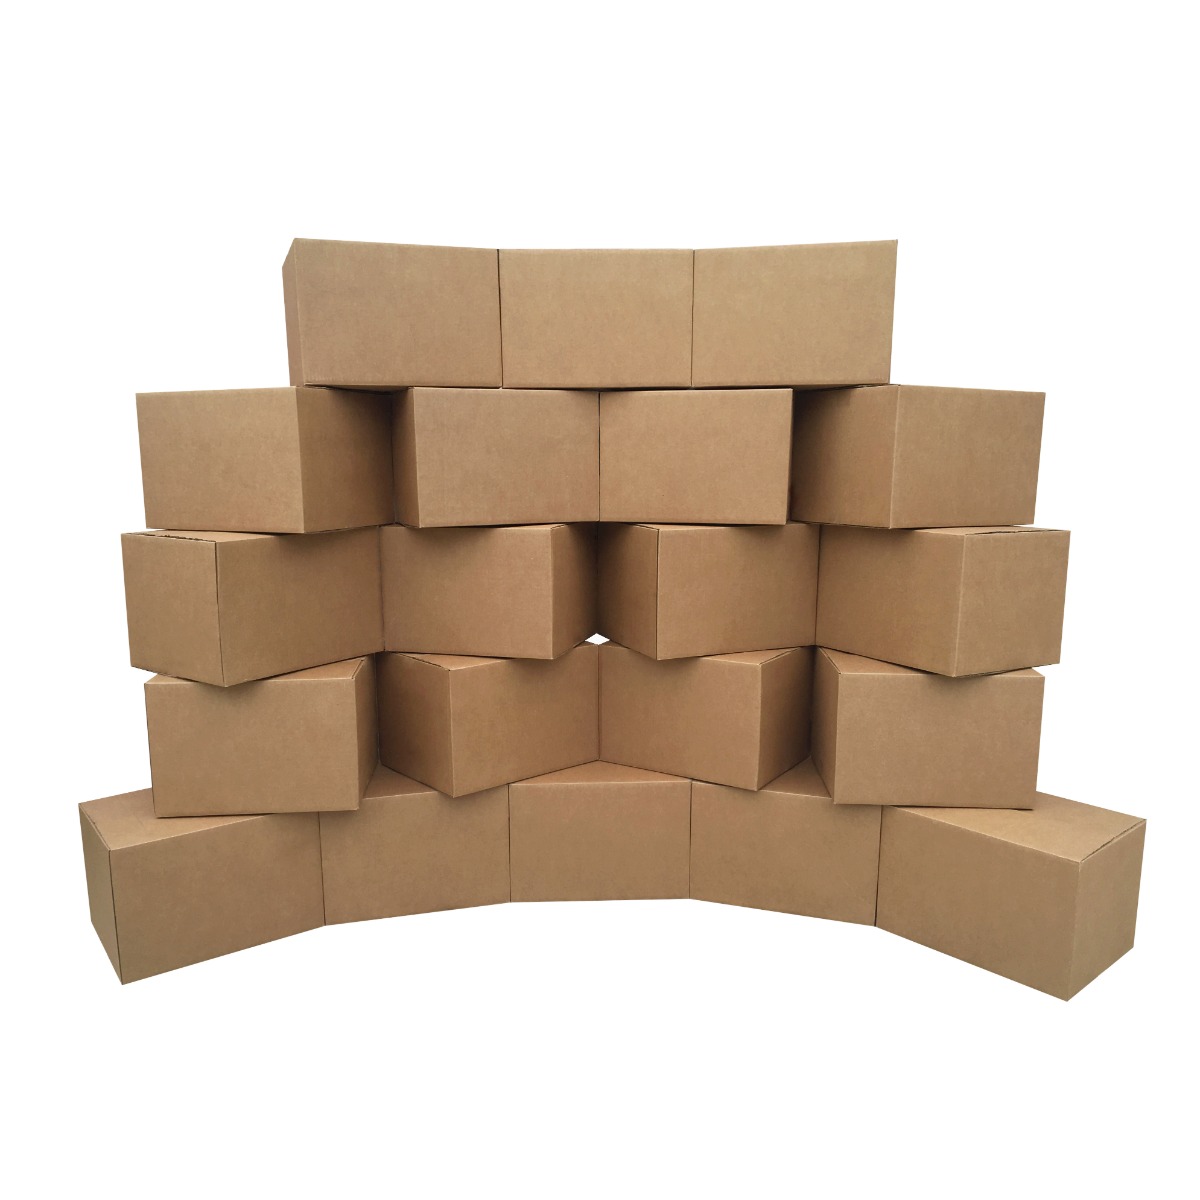 uBoxes Medium Cardboard Moving Boxes (20 Pack) 18 x 14 x 12-Inch - image 3 of 13